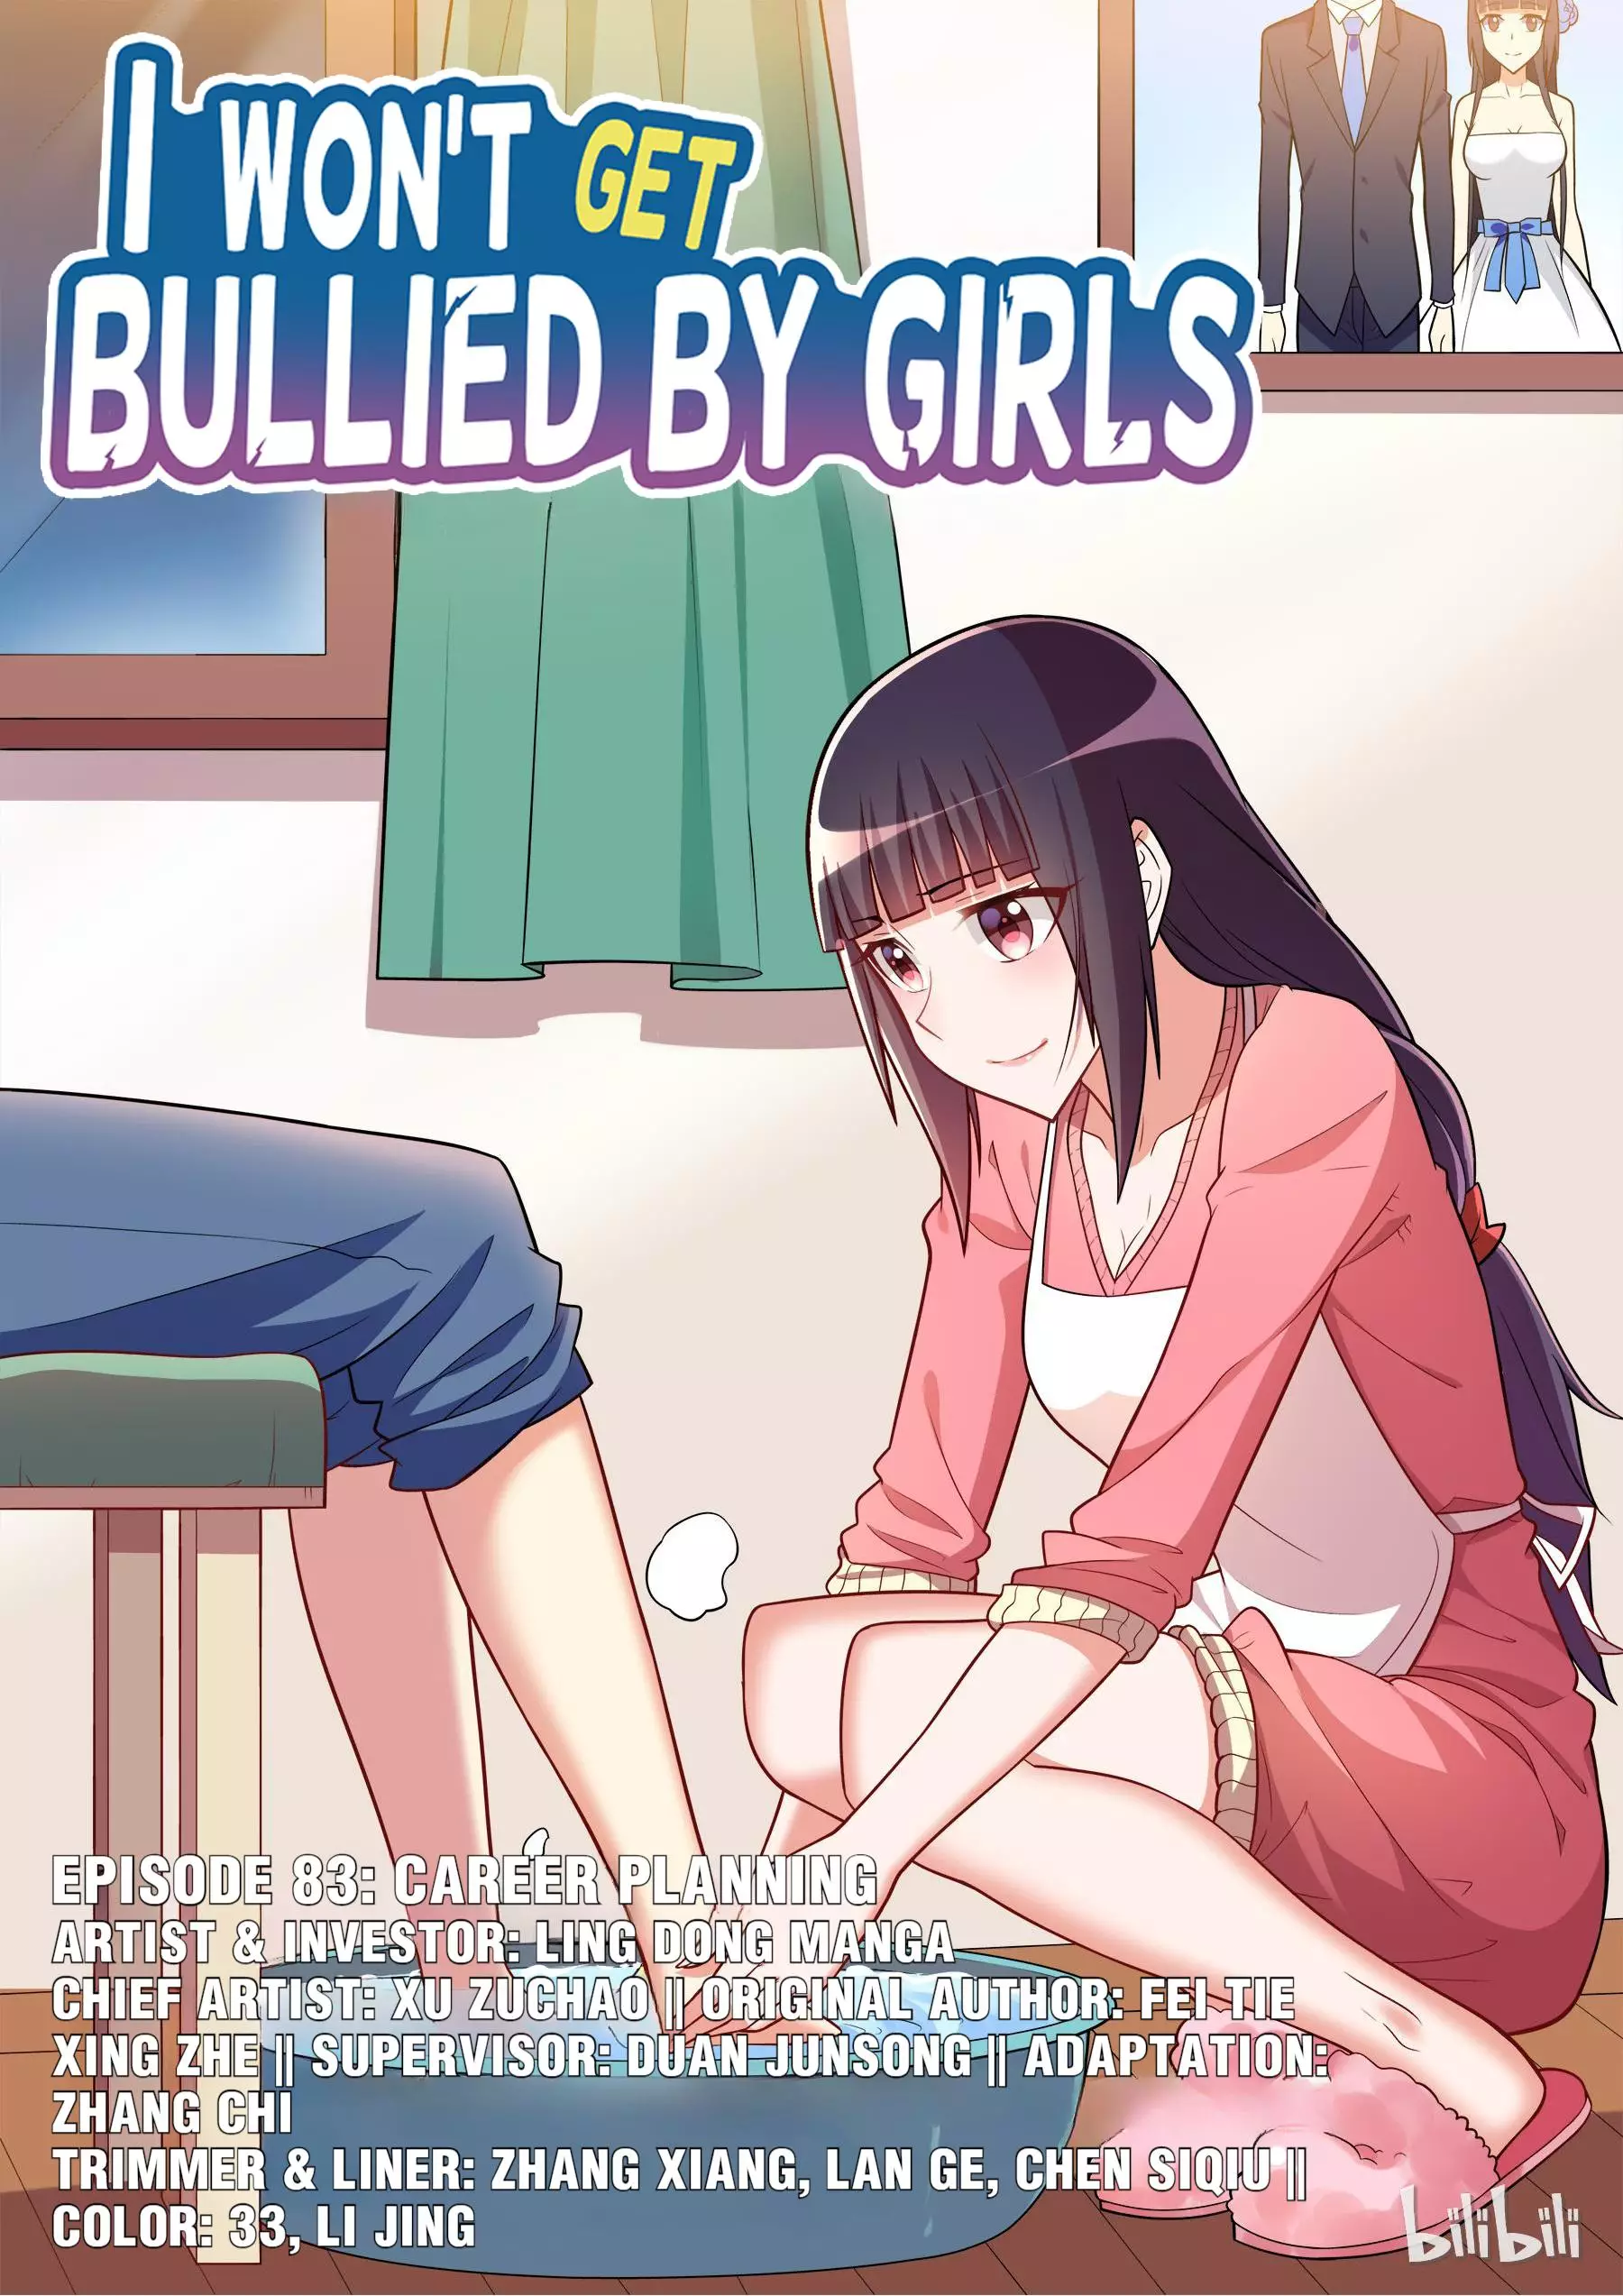 I Don't Want To Be Bullied By Girls - 83 page 1-4dd2057e